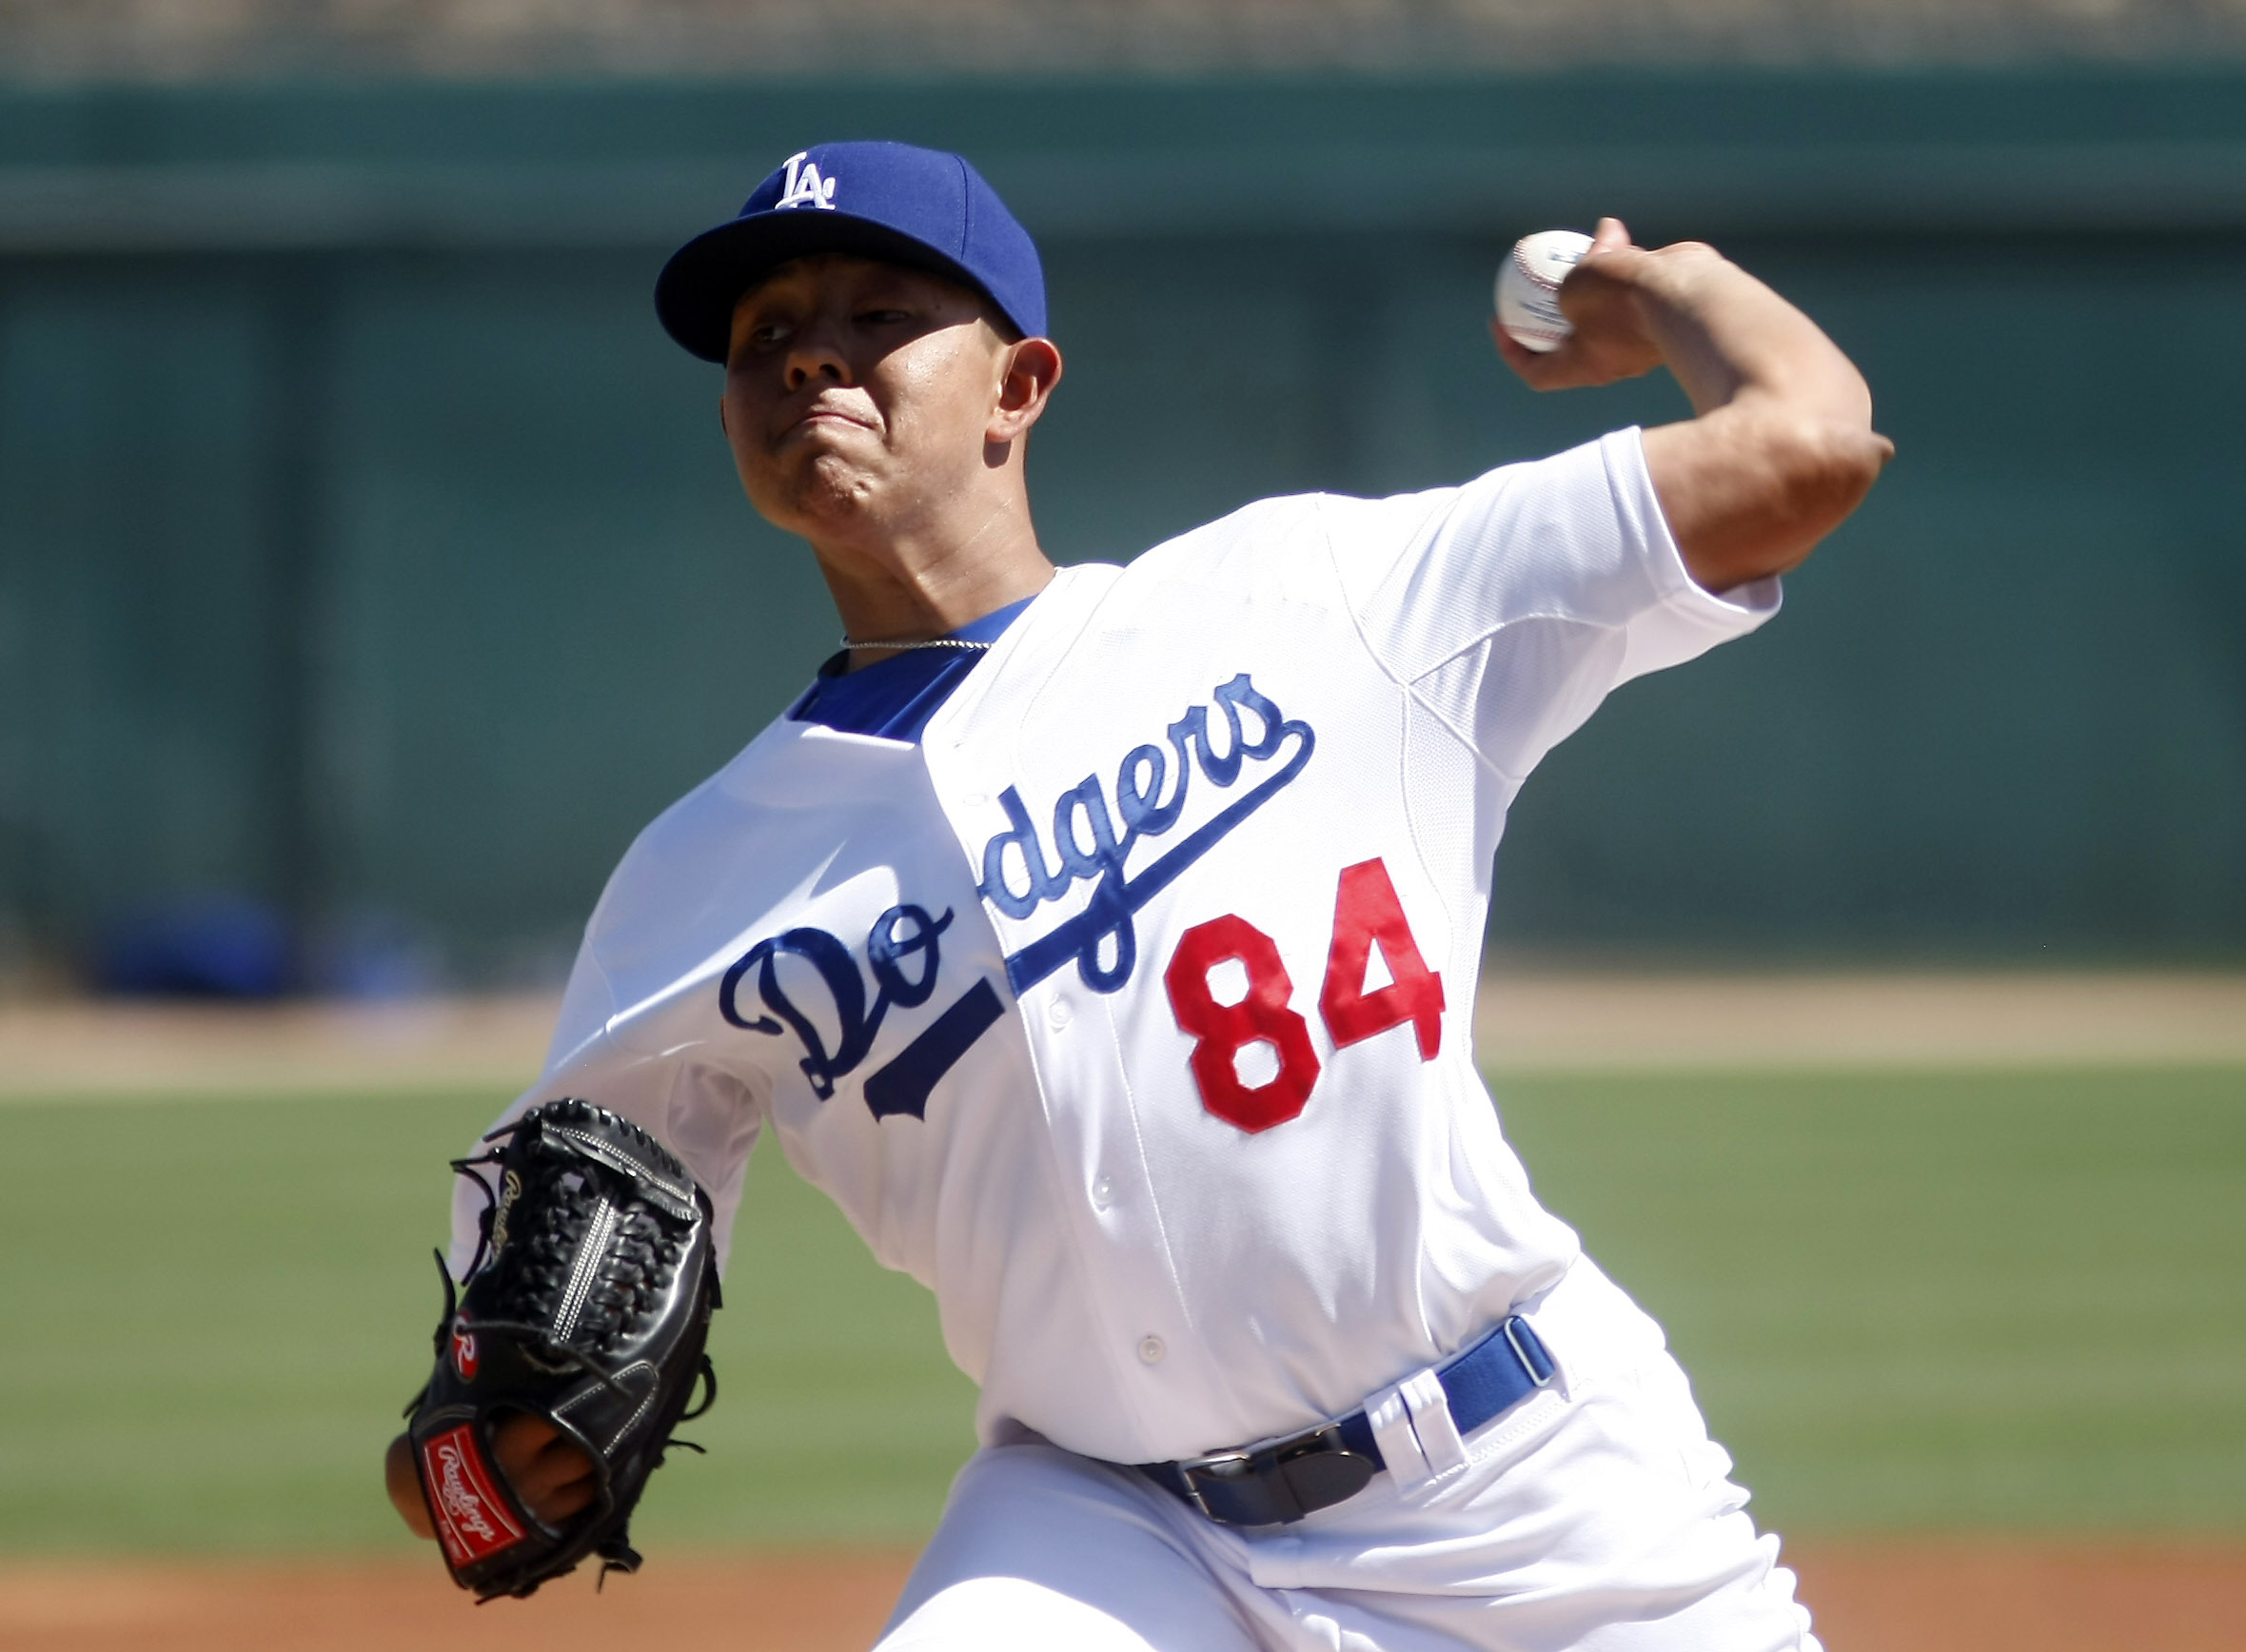 Julio Urias was one of several elite prospects new writer Wilson Karaman was fortunate to watch last summer in the California League